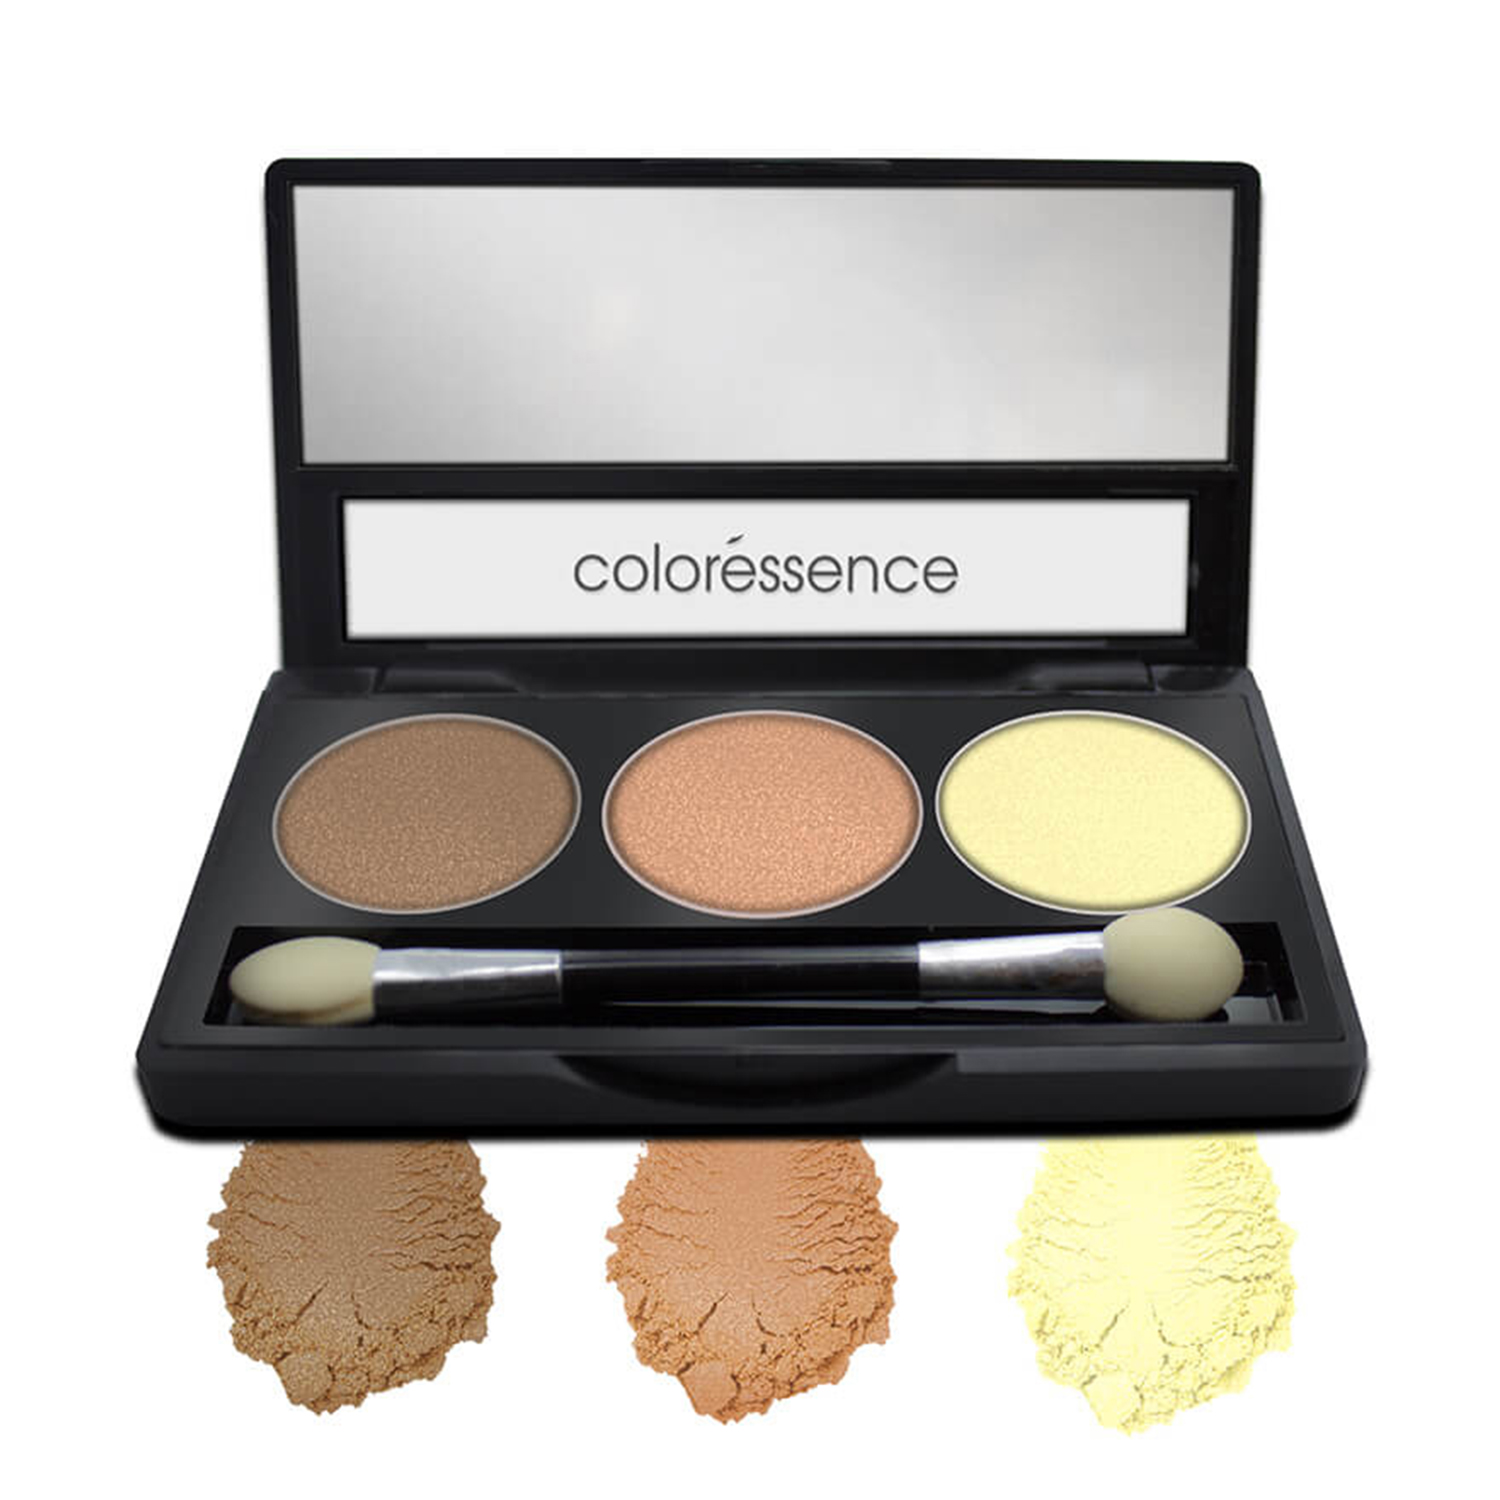 Coloressence Satin Eye Shades Pearl Pigment Smooth Formula Eyeshadow Makeup Palatte, 7.5gm-Ombre